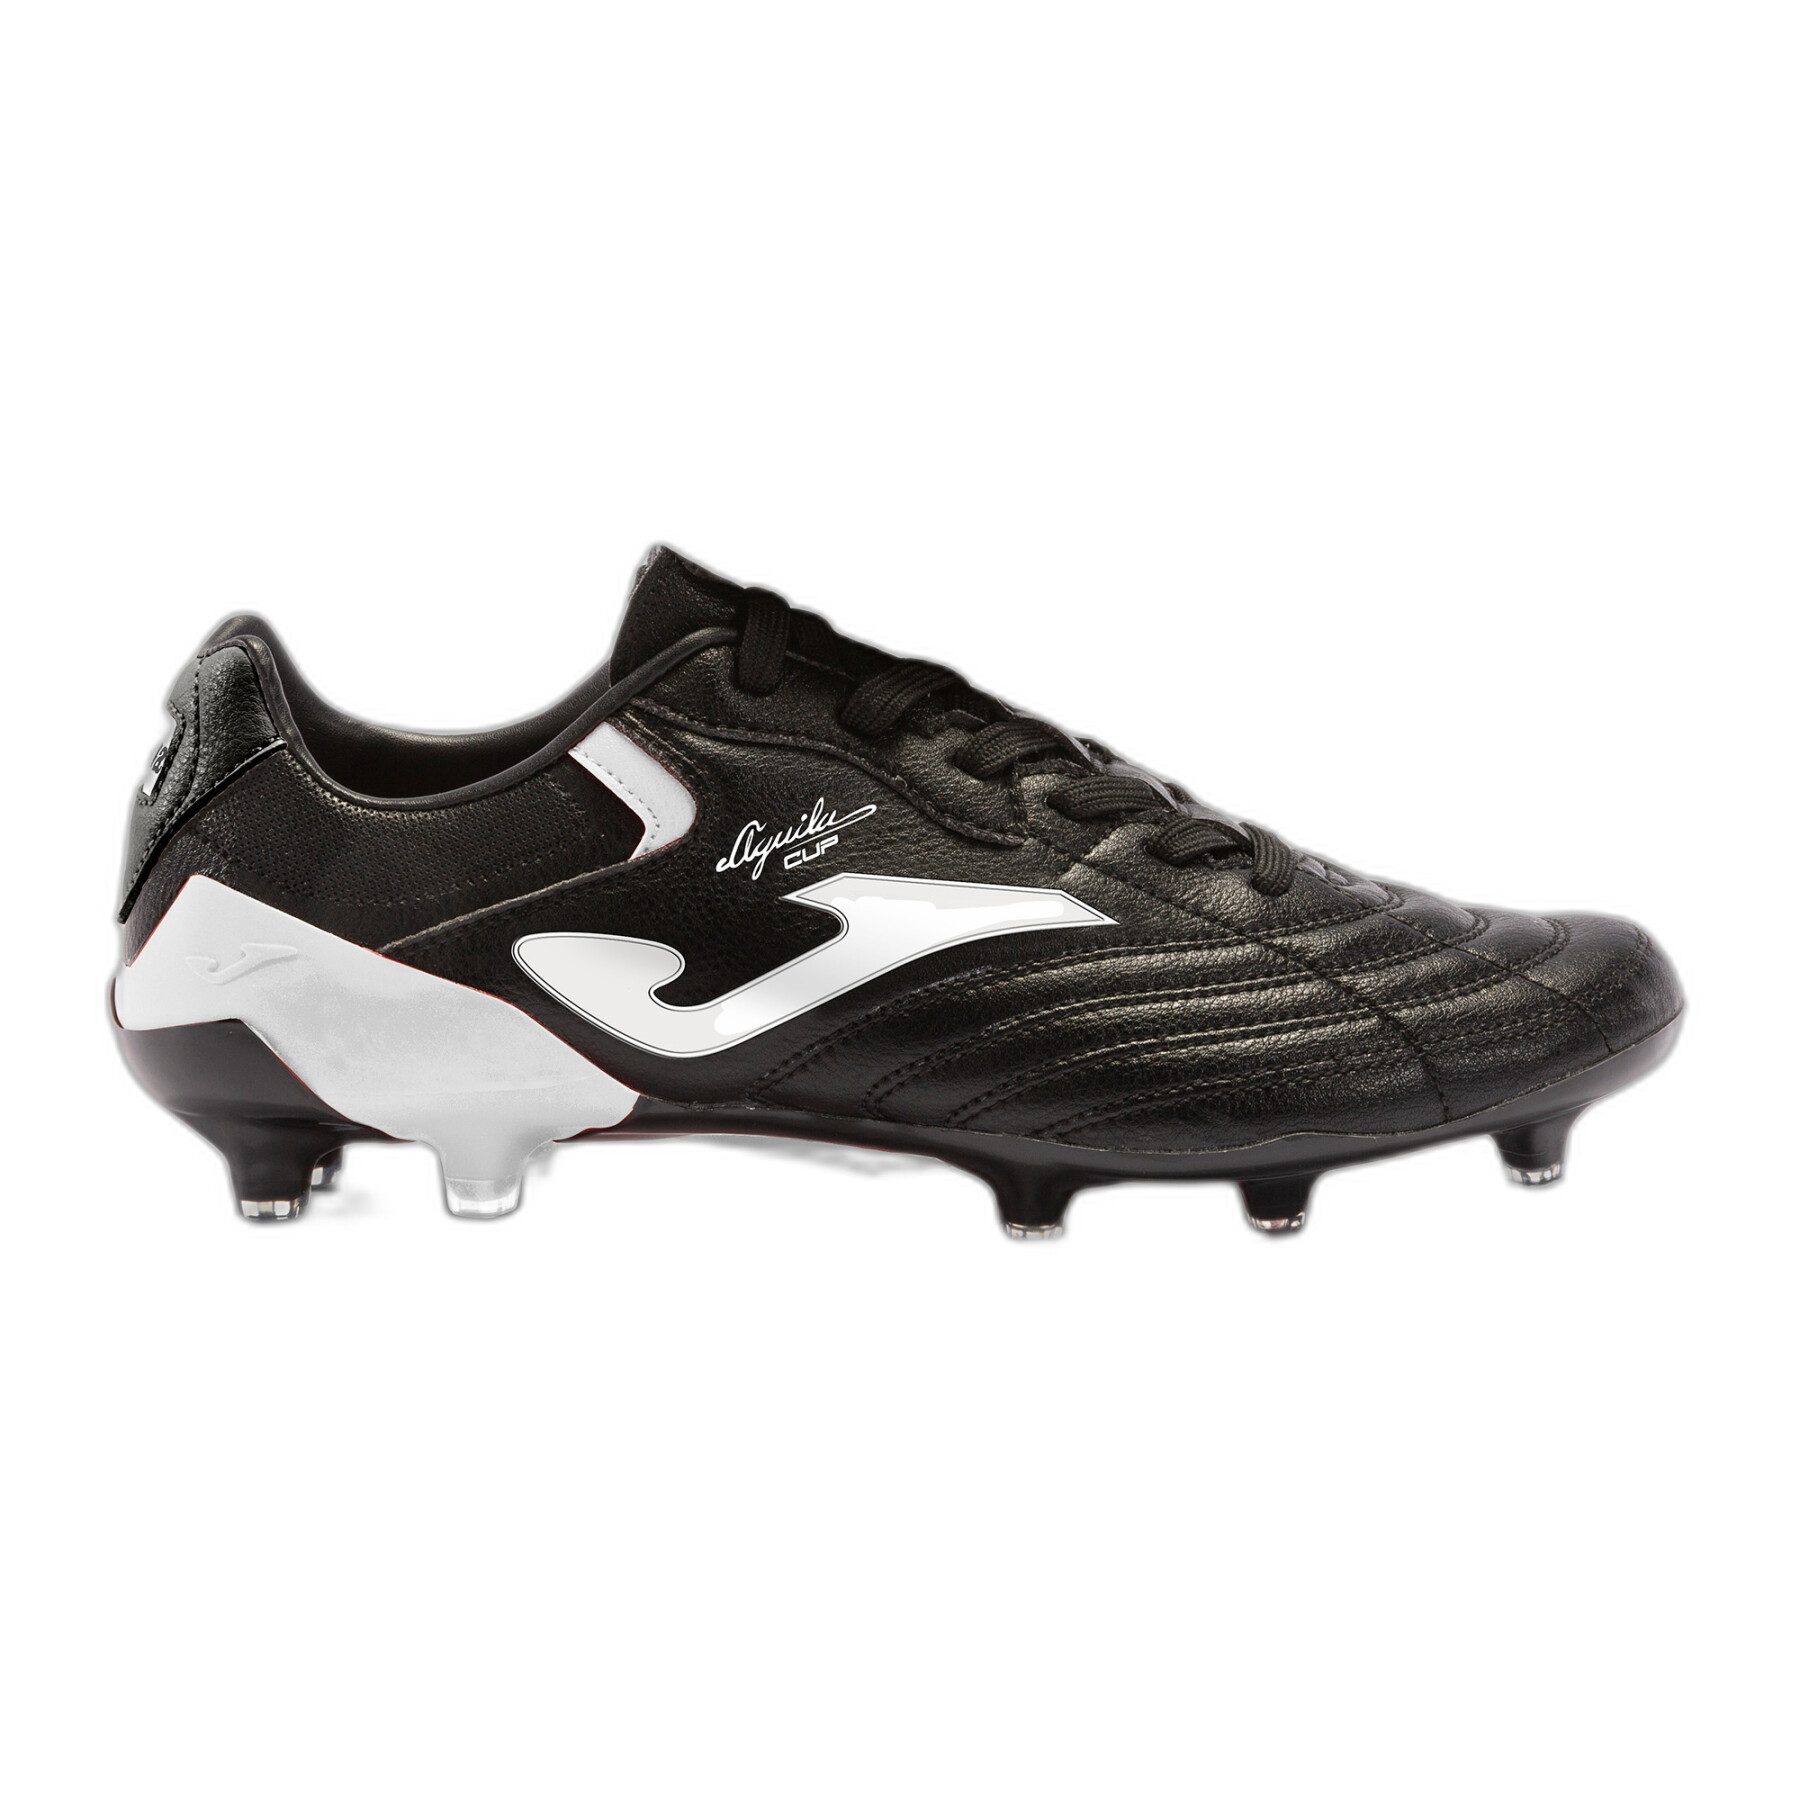 Chaussures de football Joma Aguila Cup 2401 FG